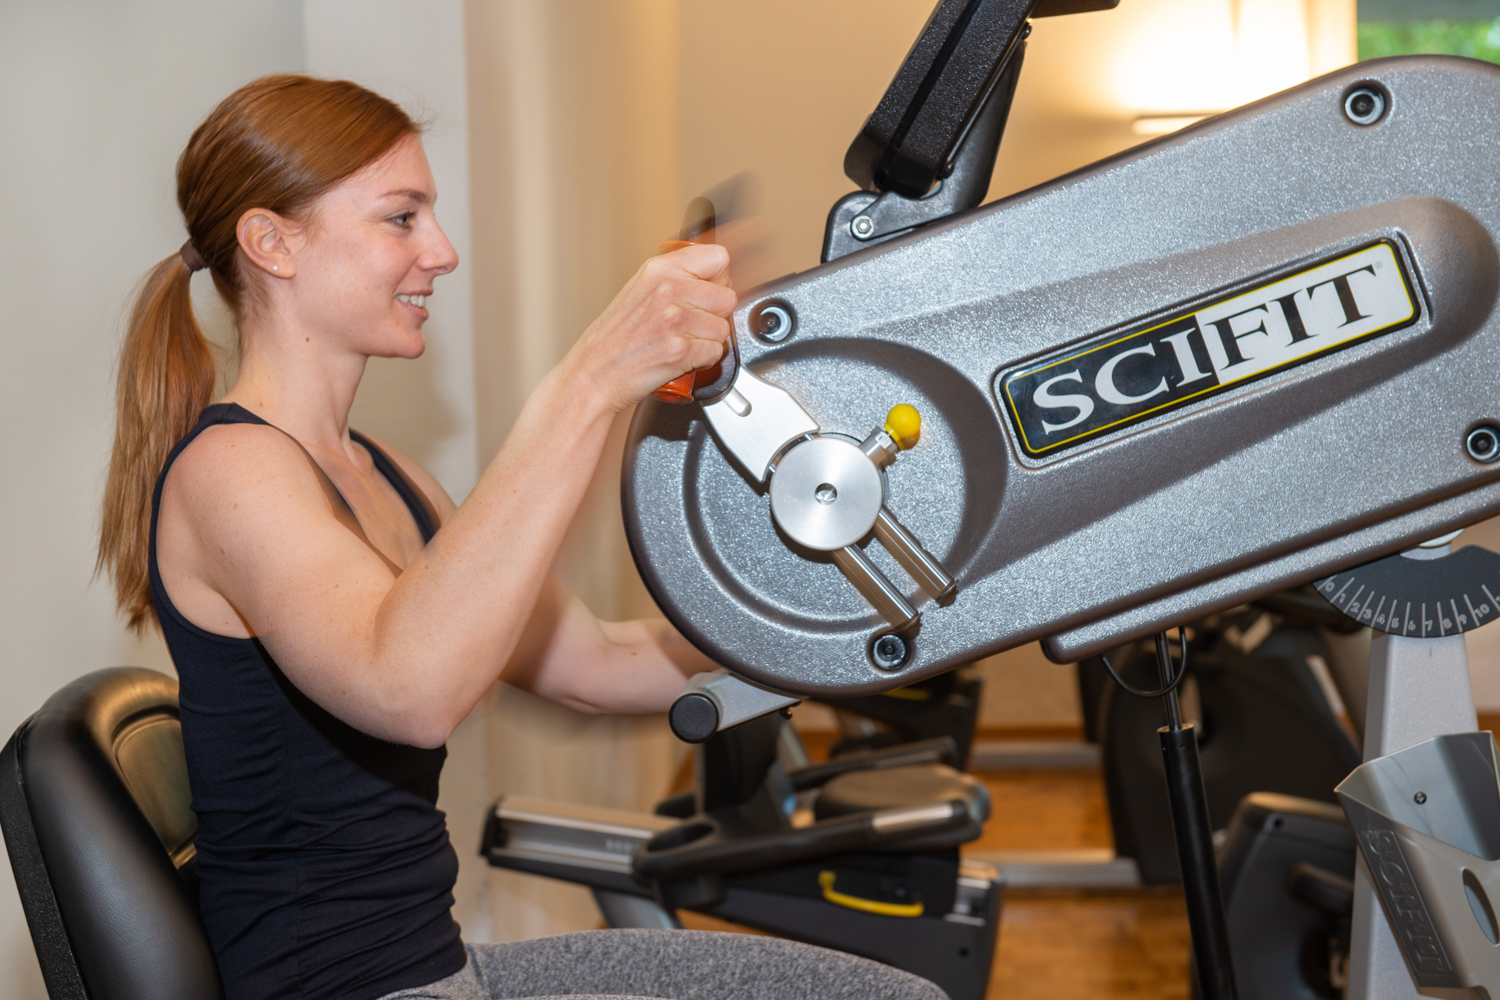 Patient with long brown hair and black top sits at a walking ergometer and makes circular movements while smiling.